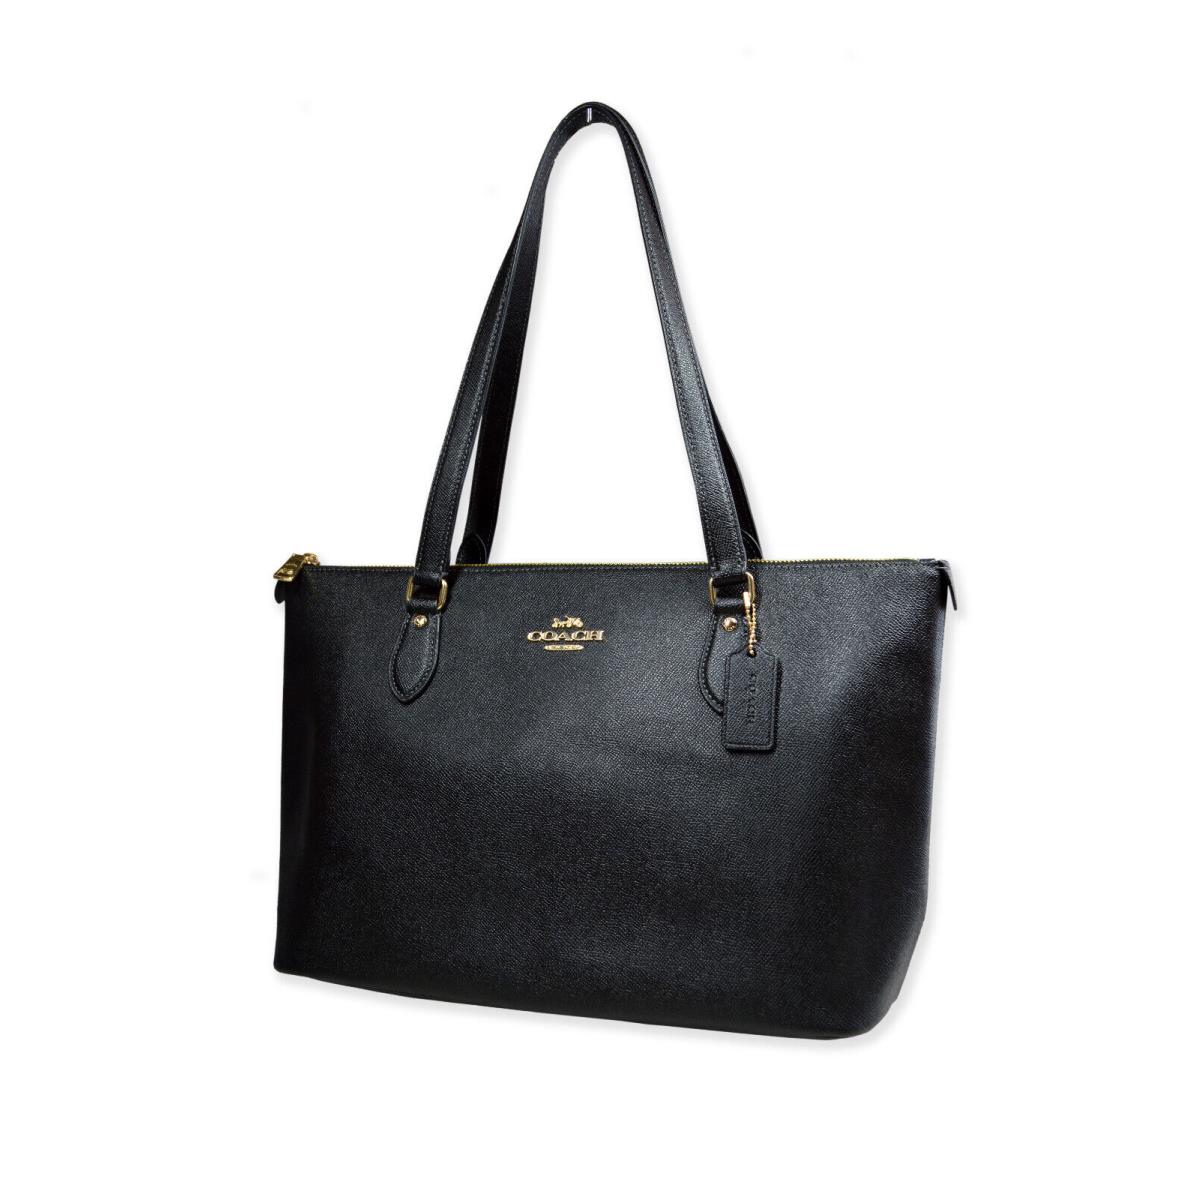 Coach Womens Black and Gold Signature Print Leather Gallery Tote Bag 8818-8